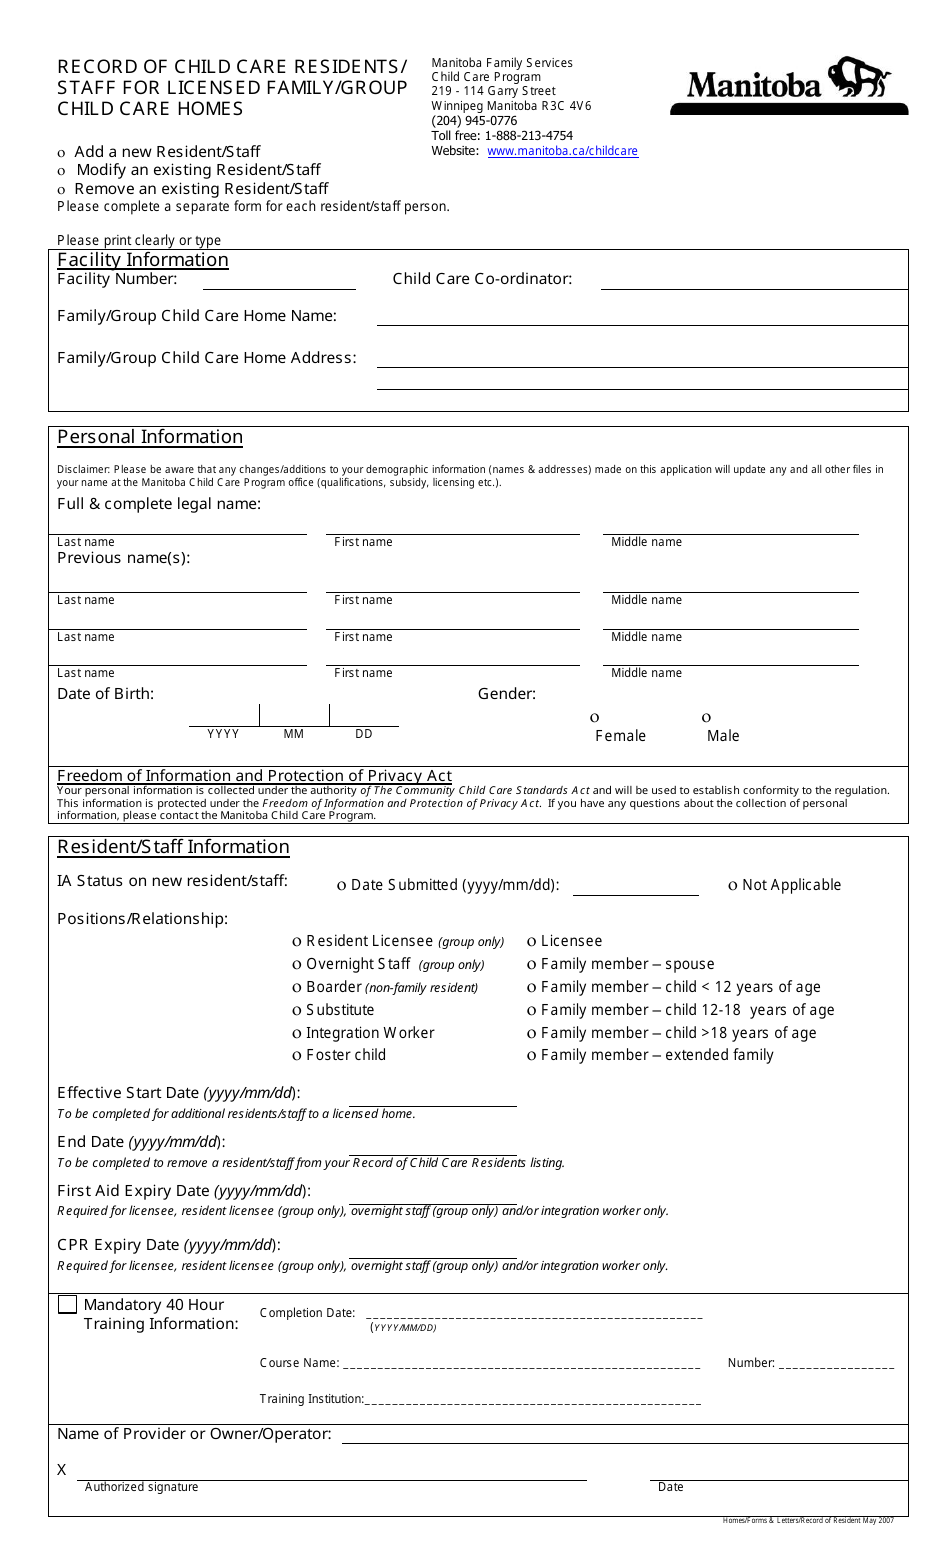 Record of Child Care Residents / Staff for Licensed Family / Group Child Care Homes - Manitoba, Canada, Page 1